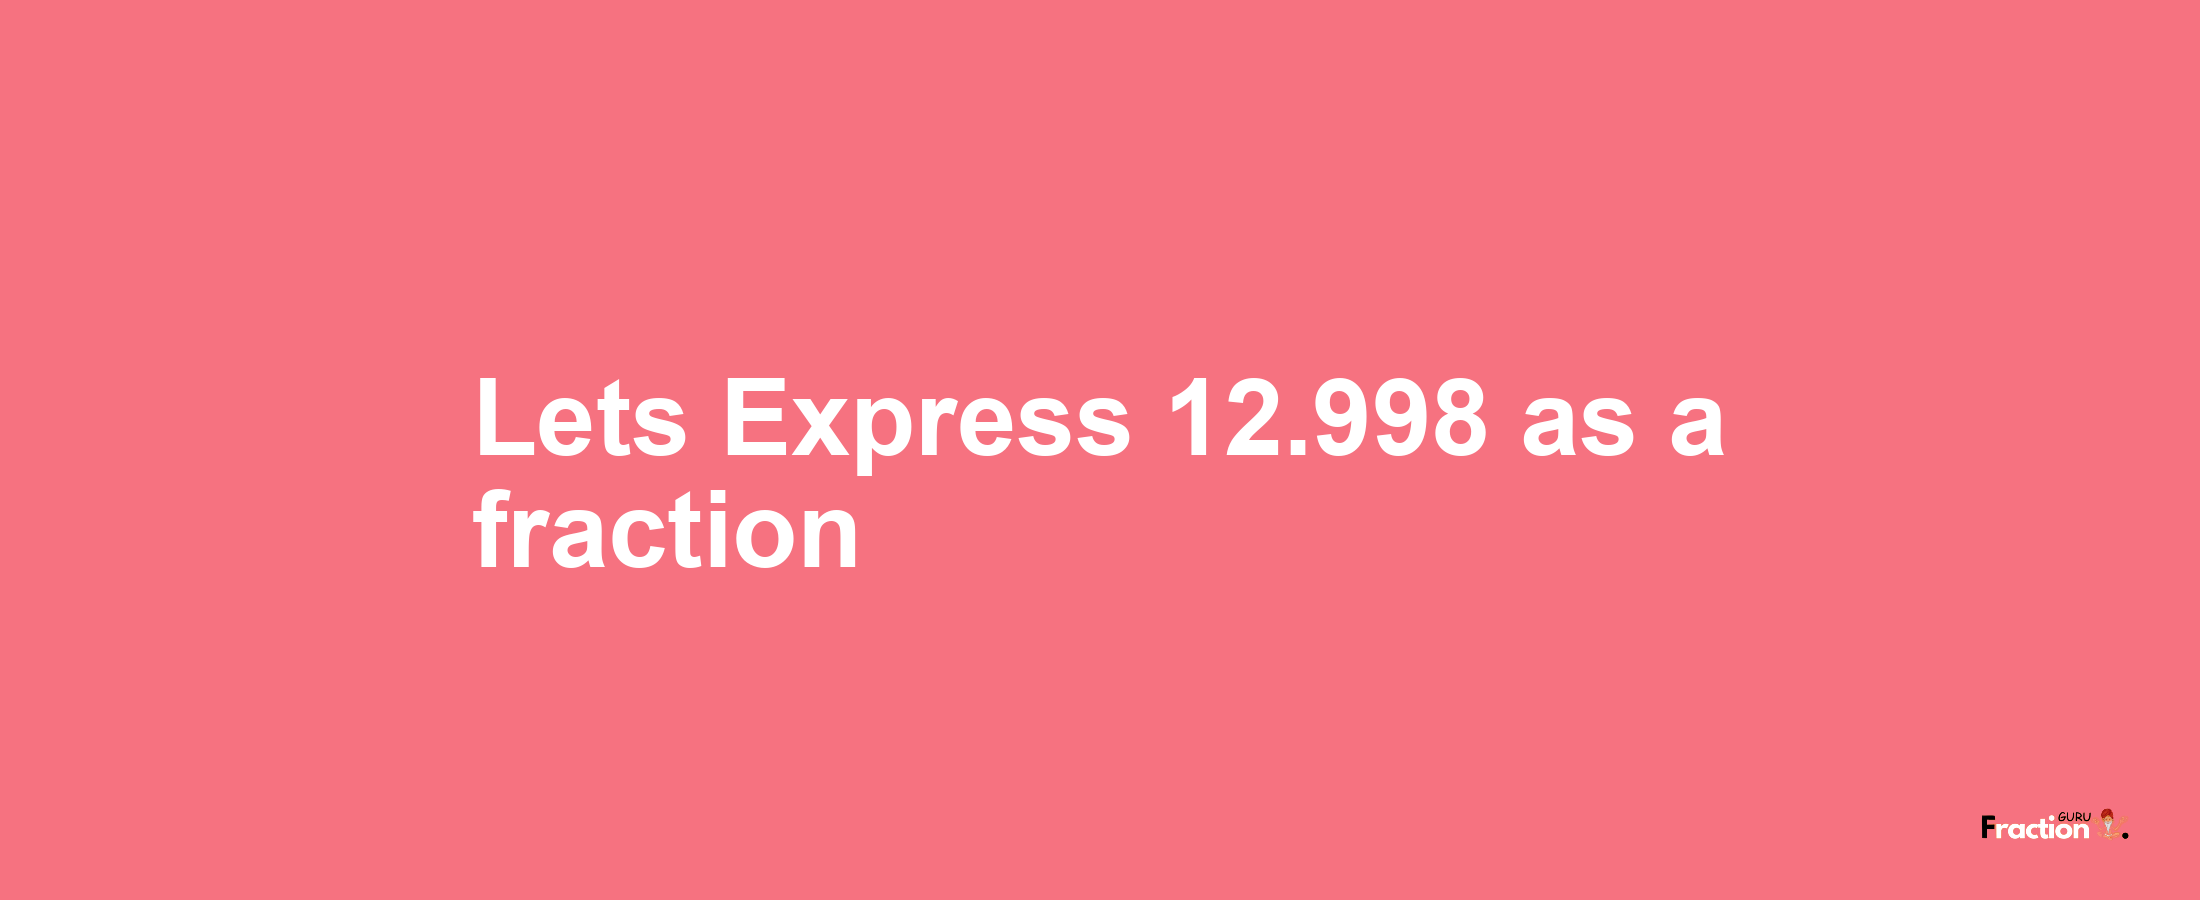 Lets Express 12.998 as afraction